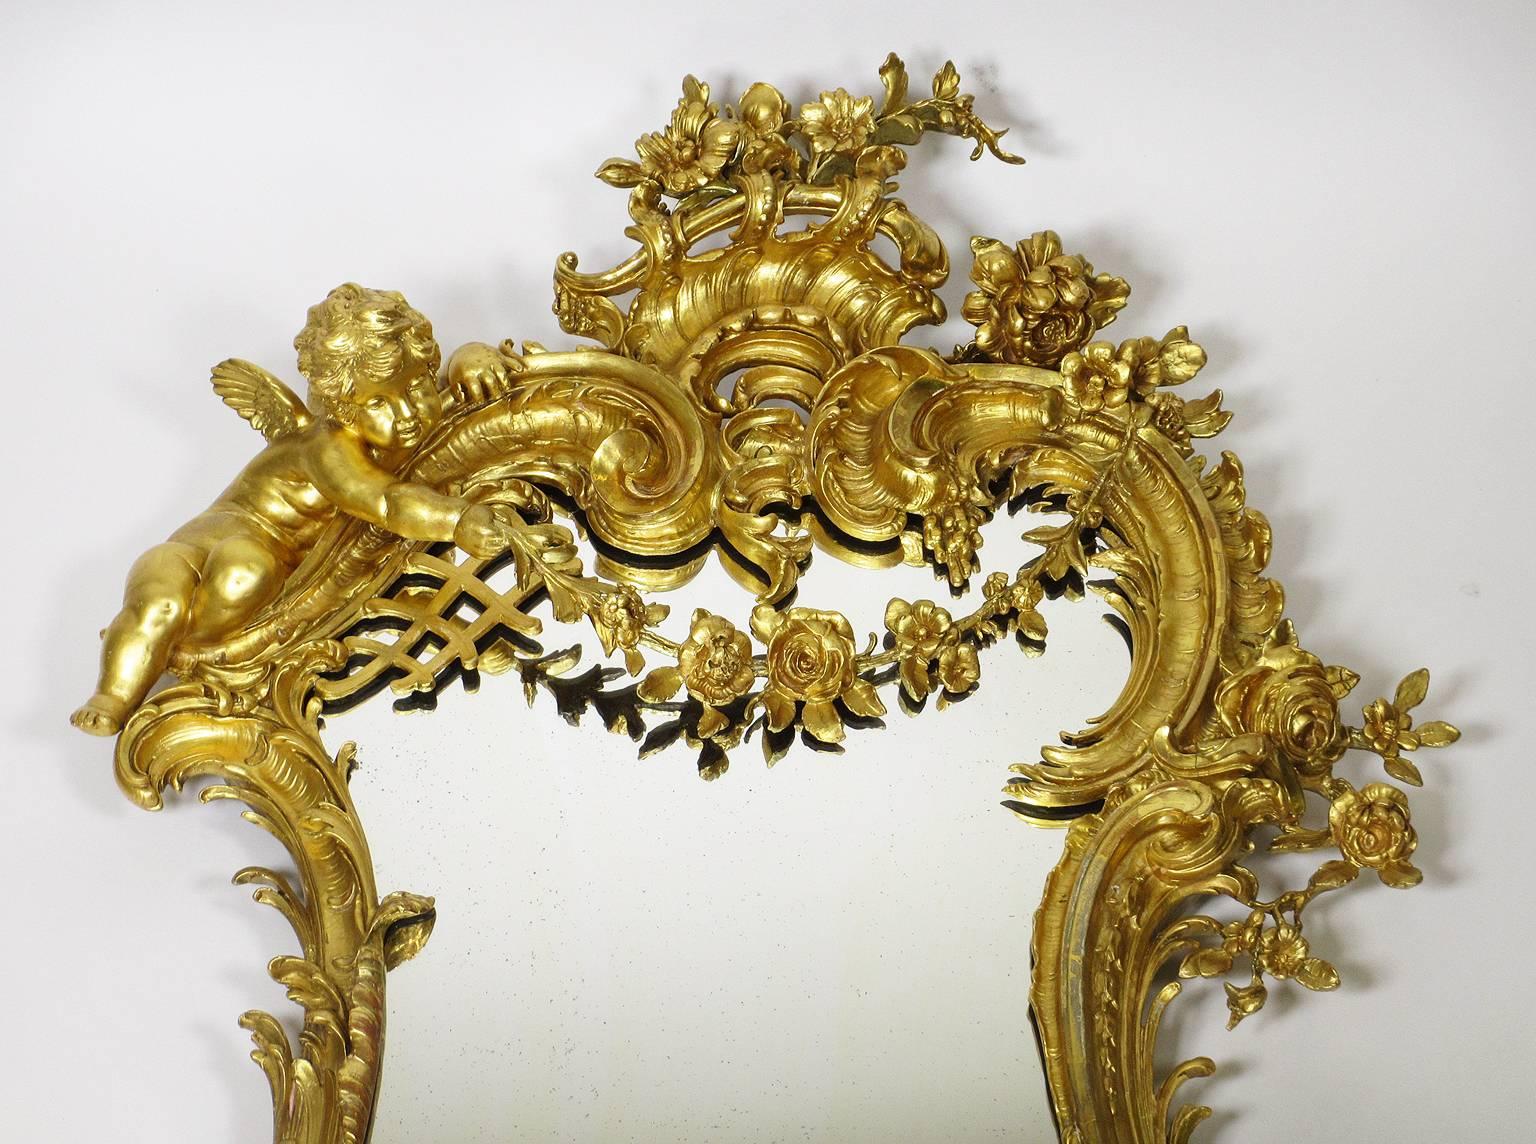 A very fine and large French 19th-20th century Louis XV style Belle Epoque giltwood and gesso carved figural mirror frame, surmounted with a hovering cherub, a cherub mask, scrolls, leaves, acanthus and floral wreaths. All gilding original, circa